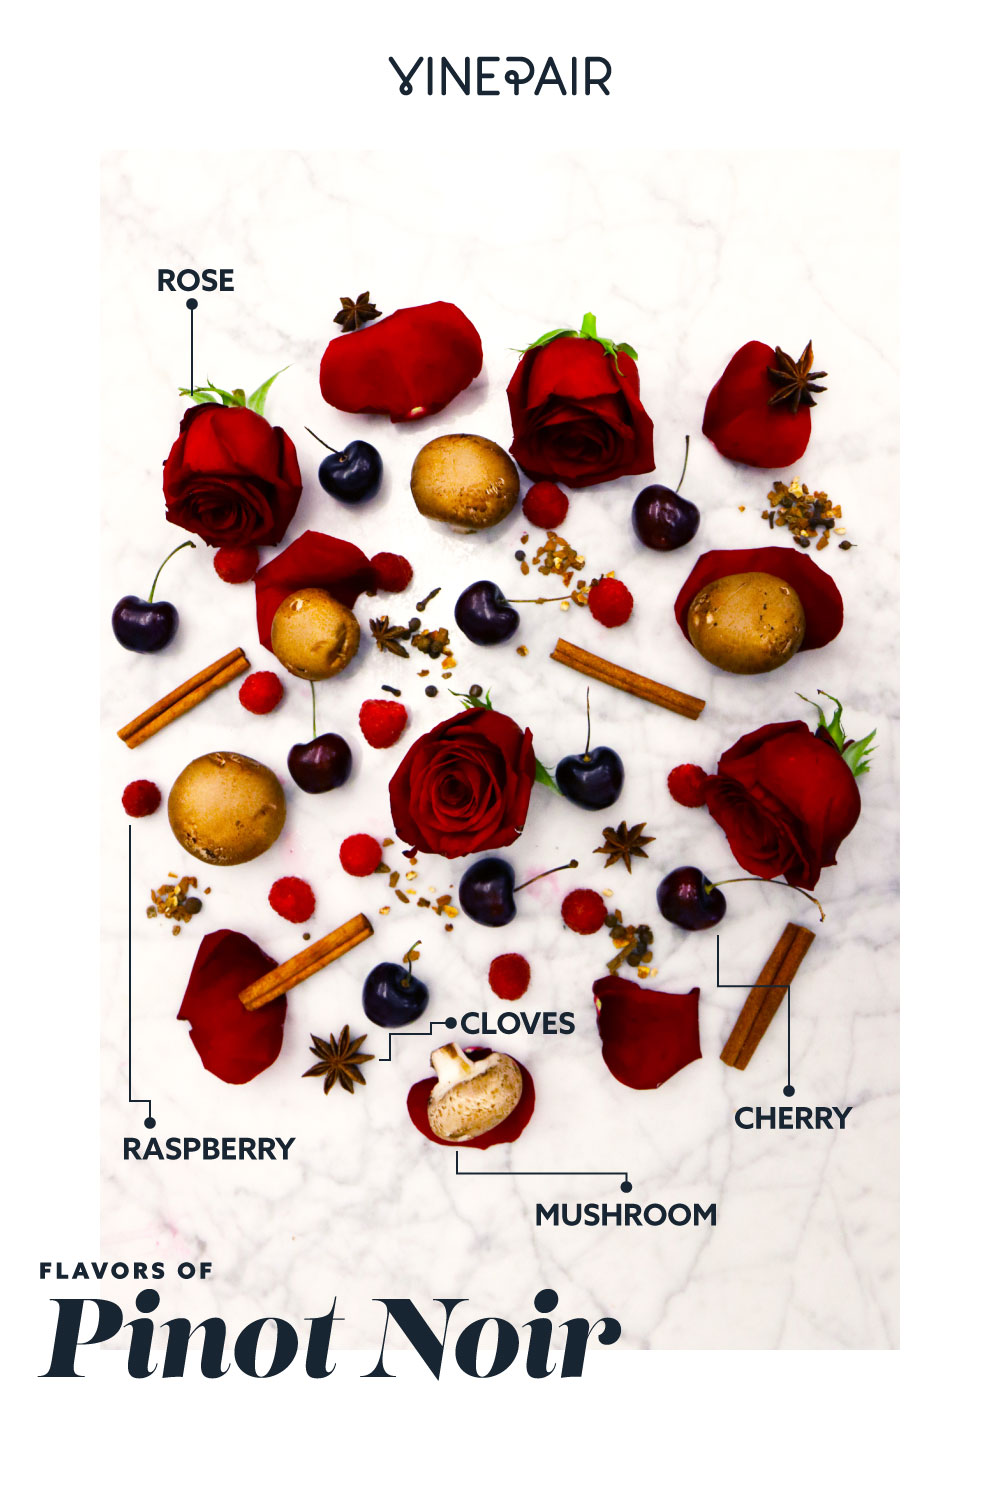 The flavors in Pinot Noir wine.